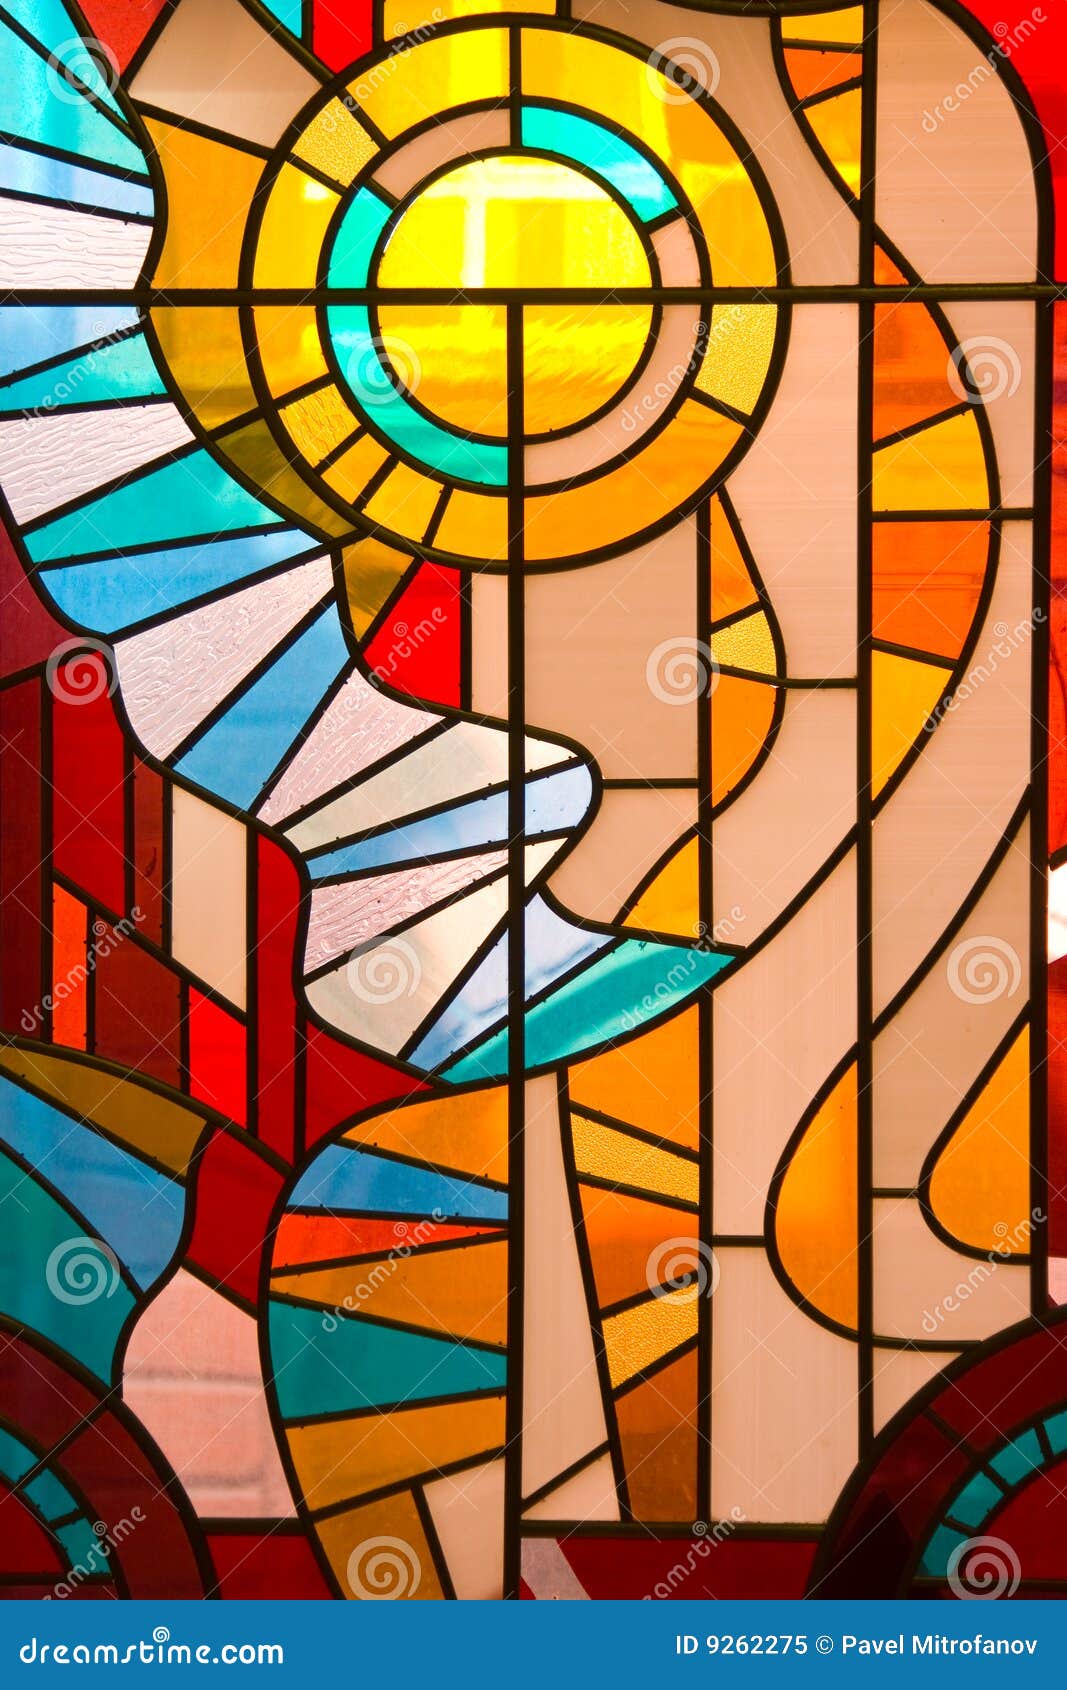 stained glass clipart - photo #17